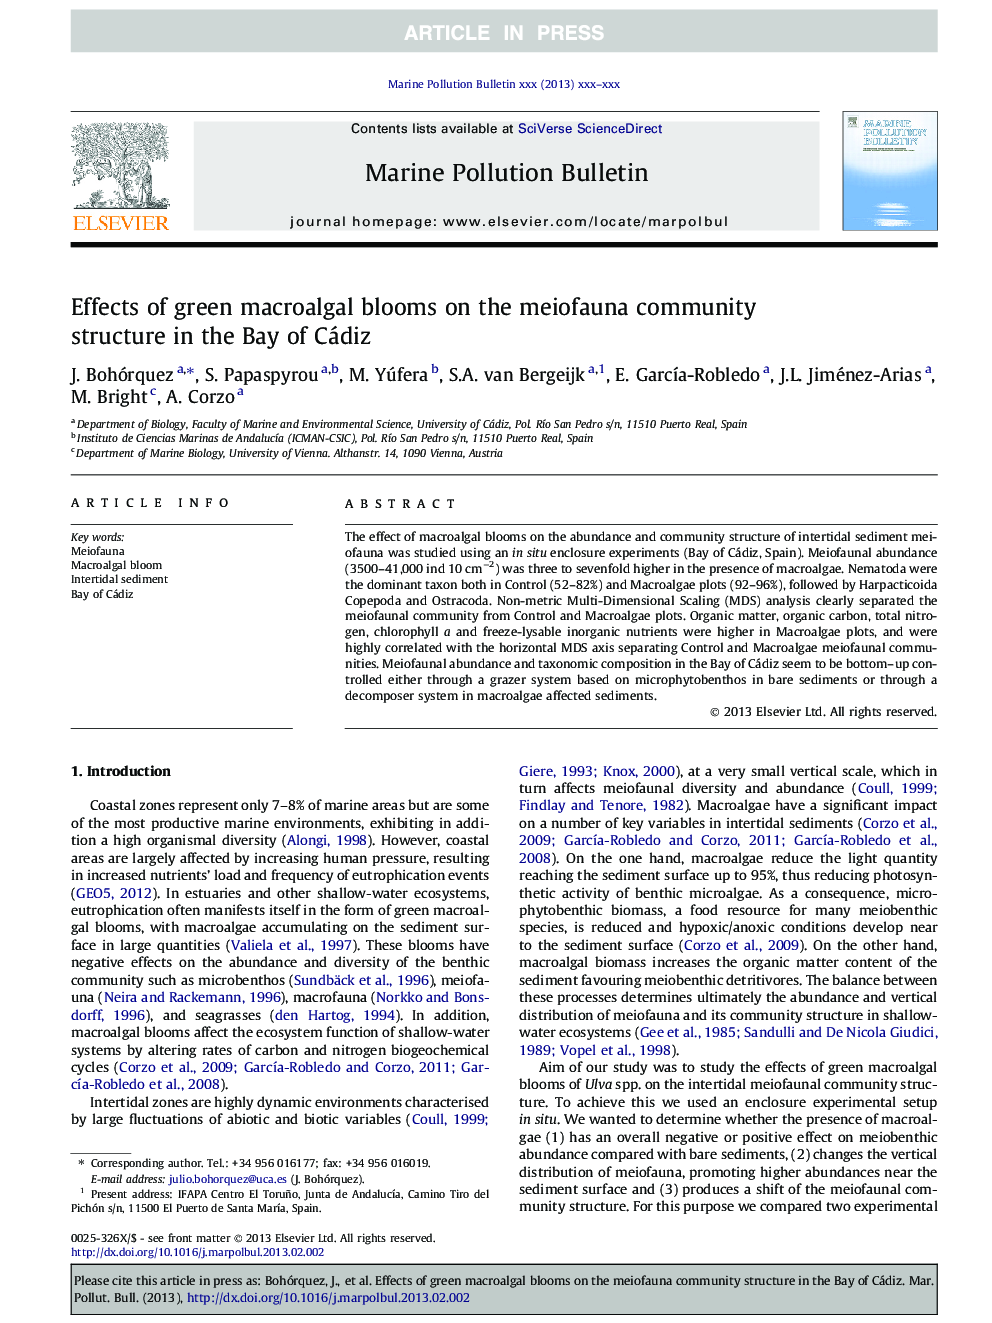 Effects of green macroalgal blooms on the meiofauna community structure in the Bay of Cádiz